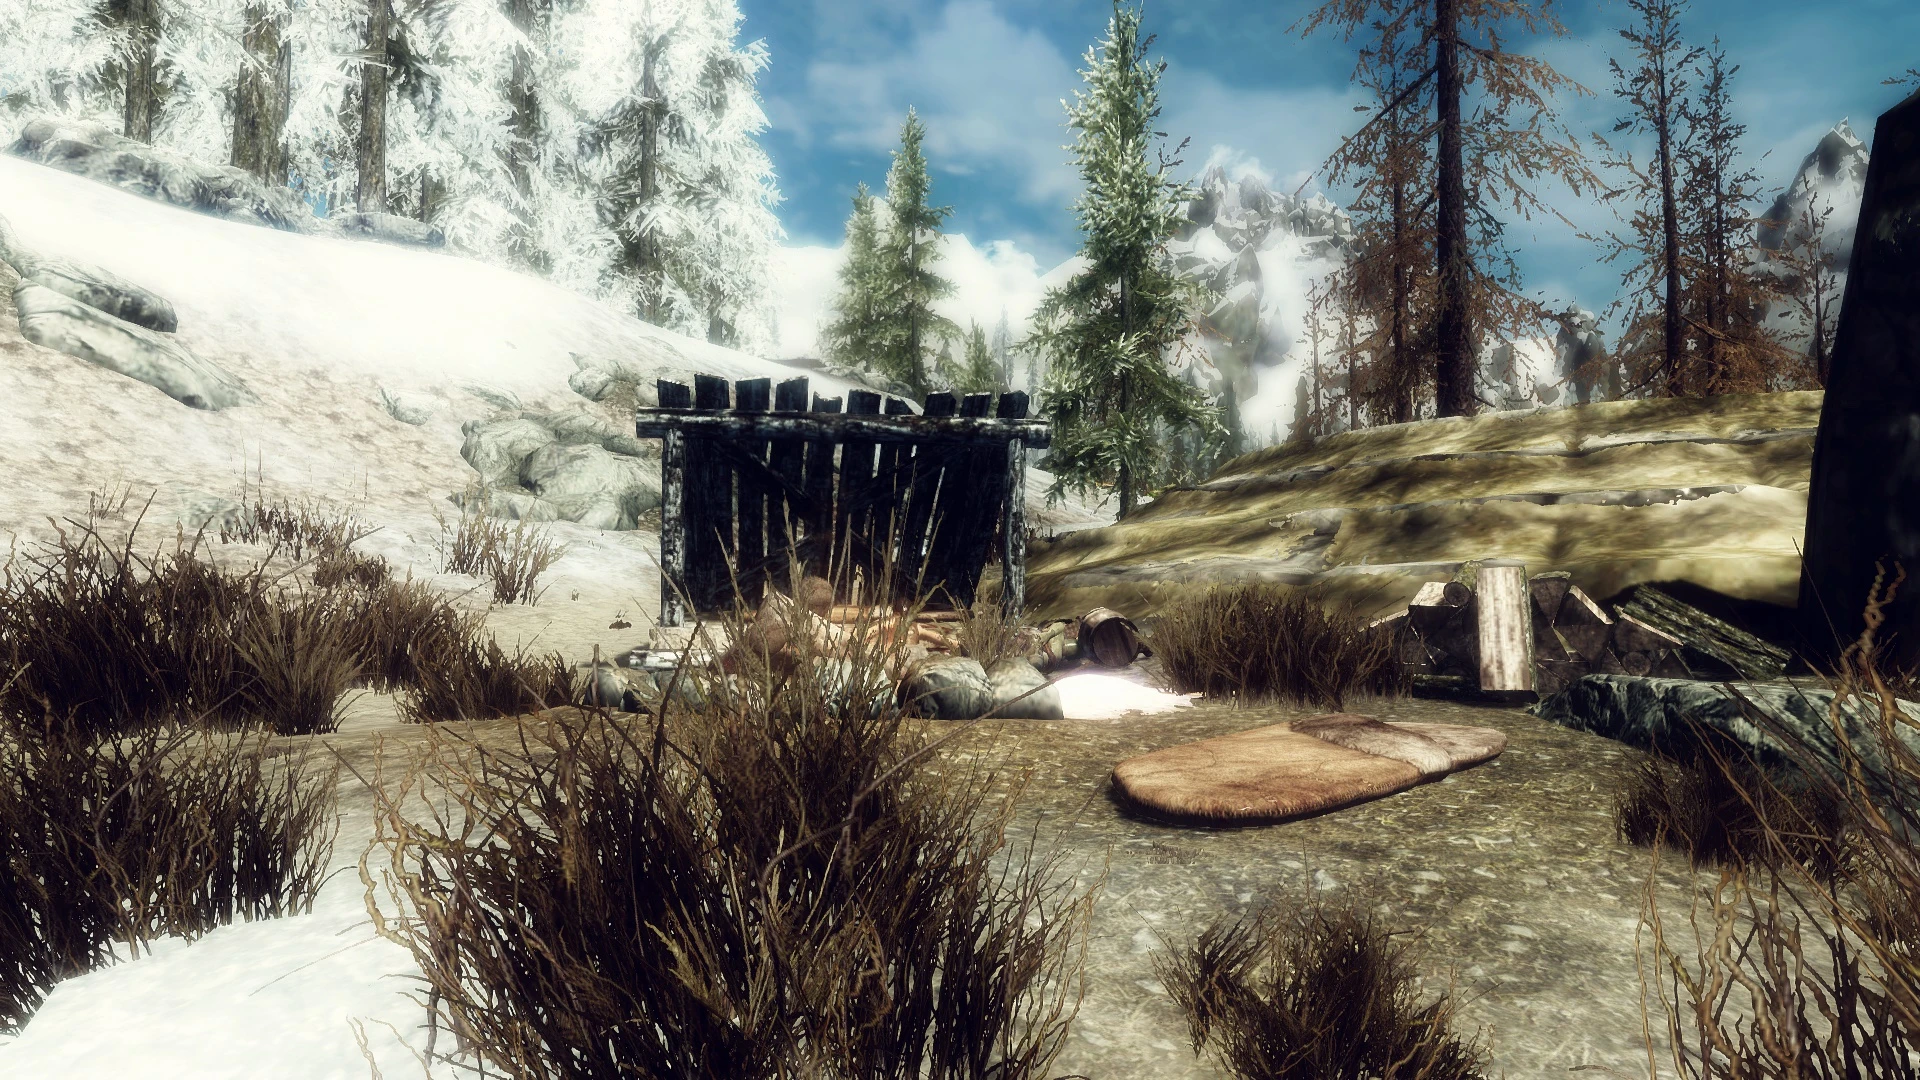 skyrim how to load enb presents